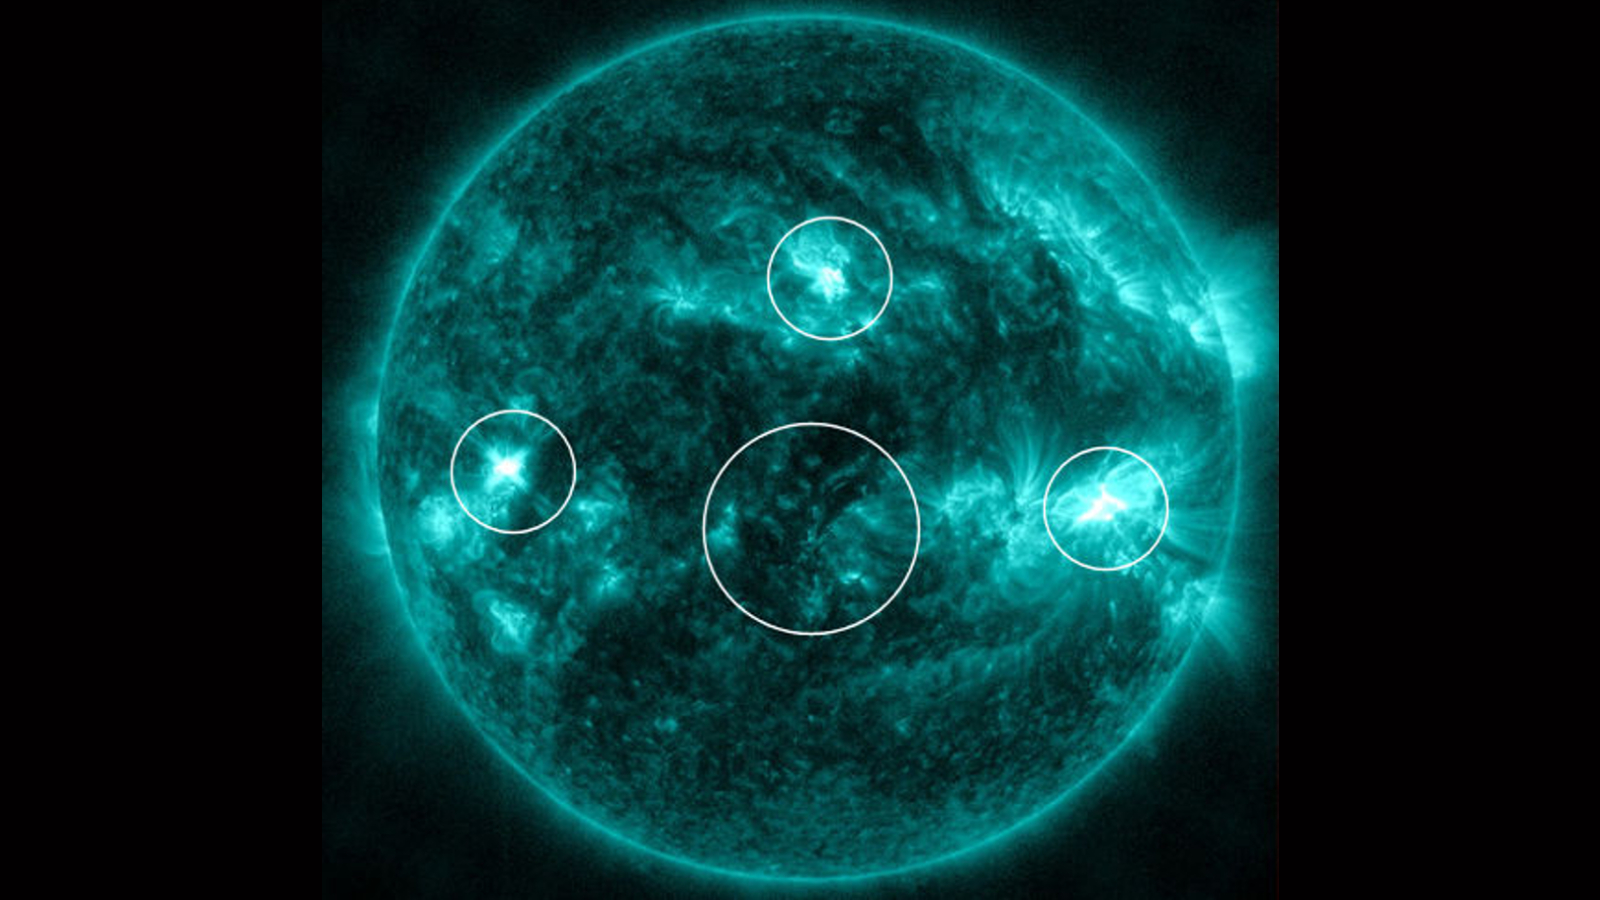 4 solar flares simultaneously erupt from the sun in rare 'super' explosion — and Earth could be hit by the fallout